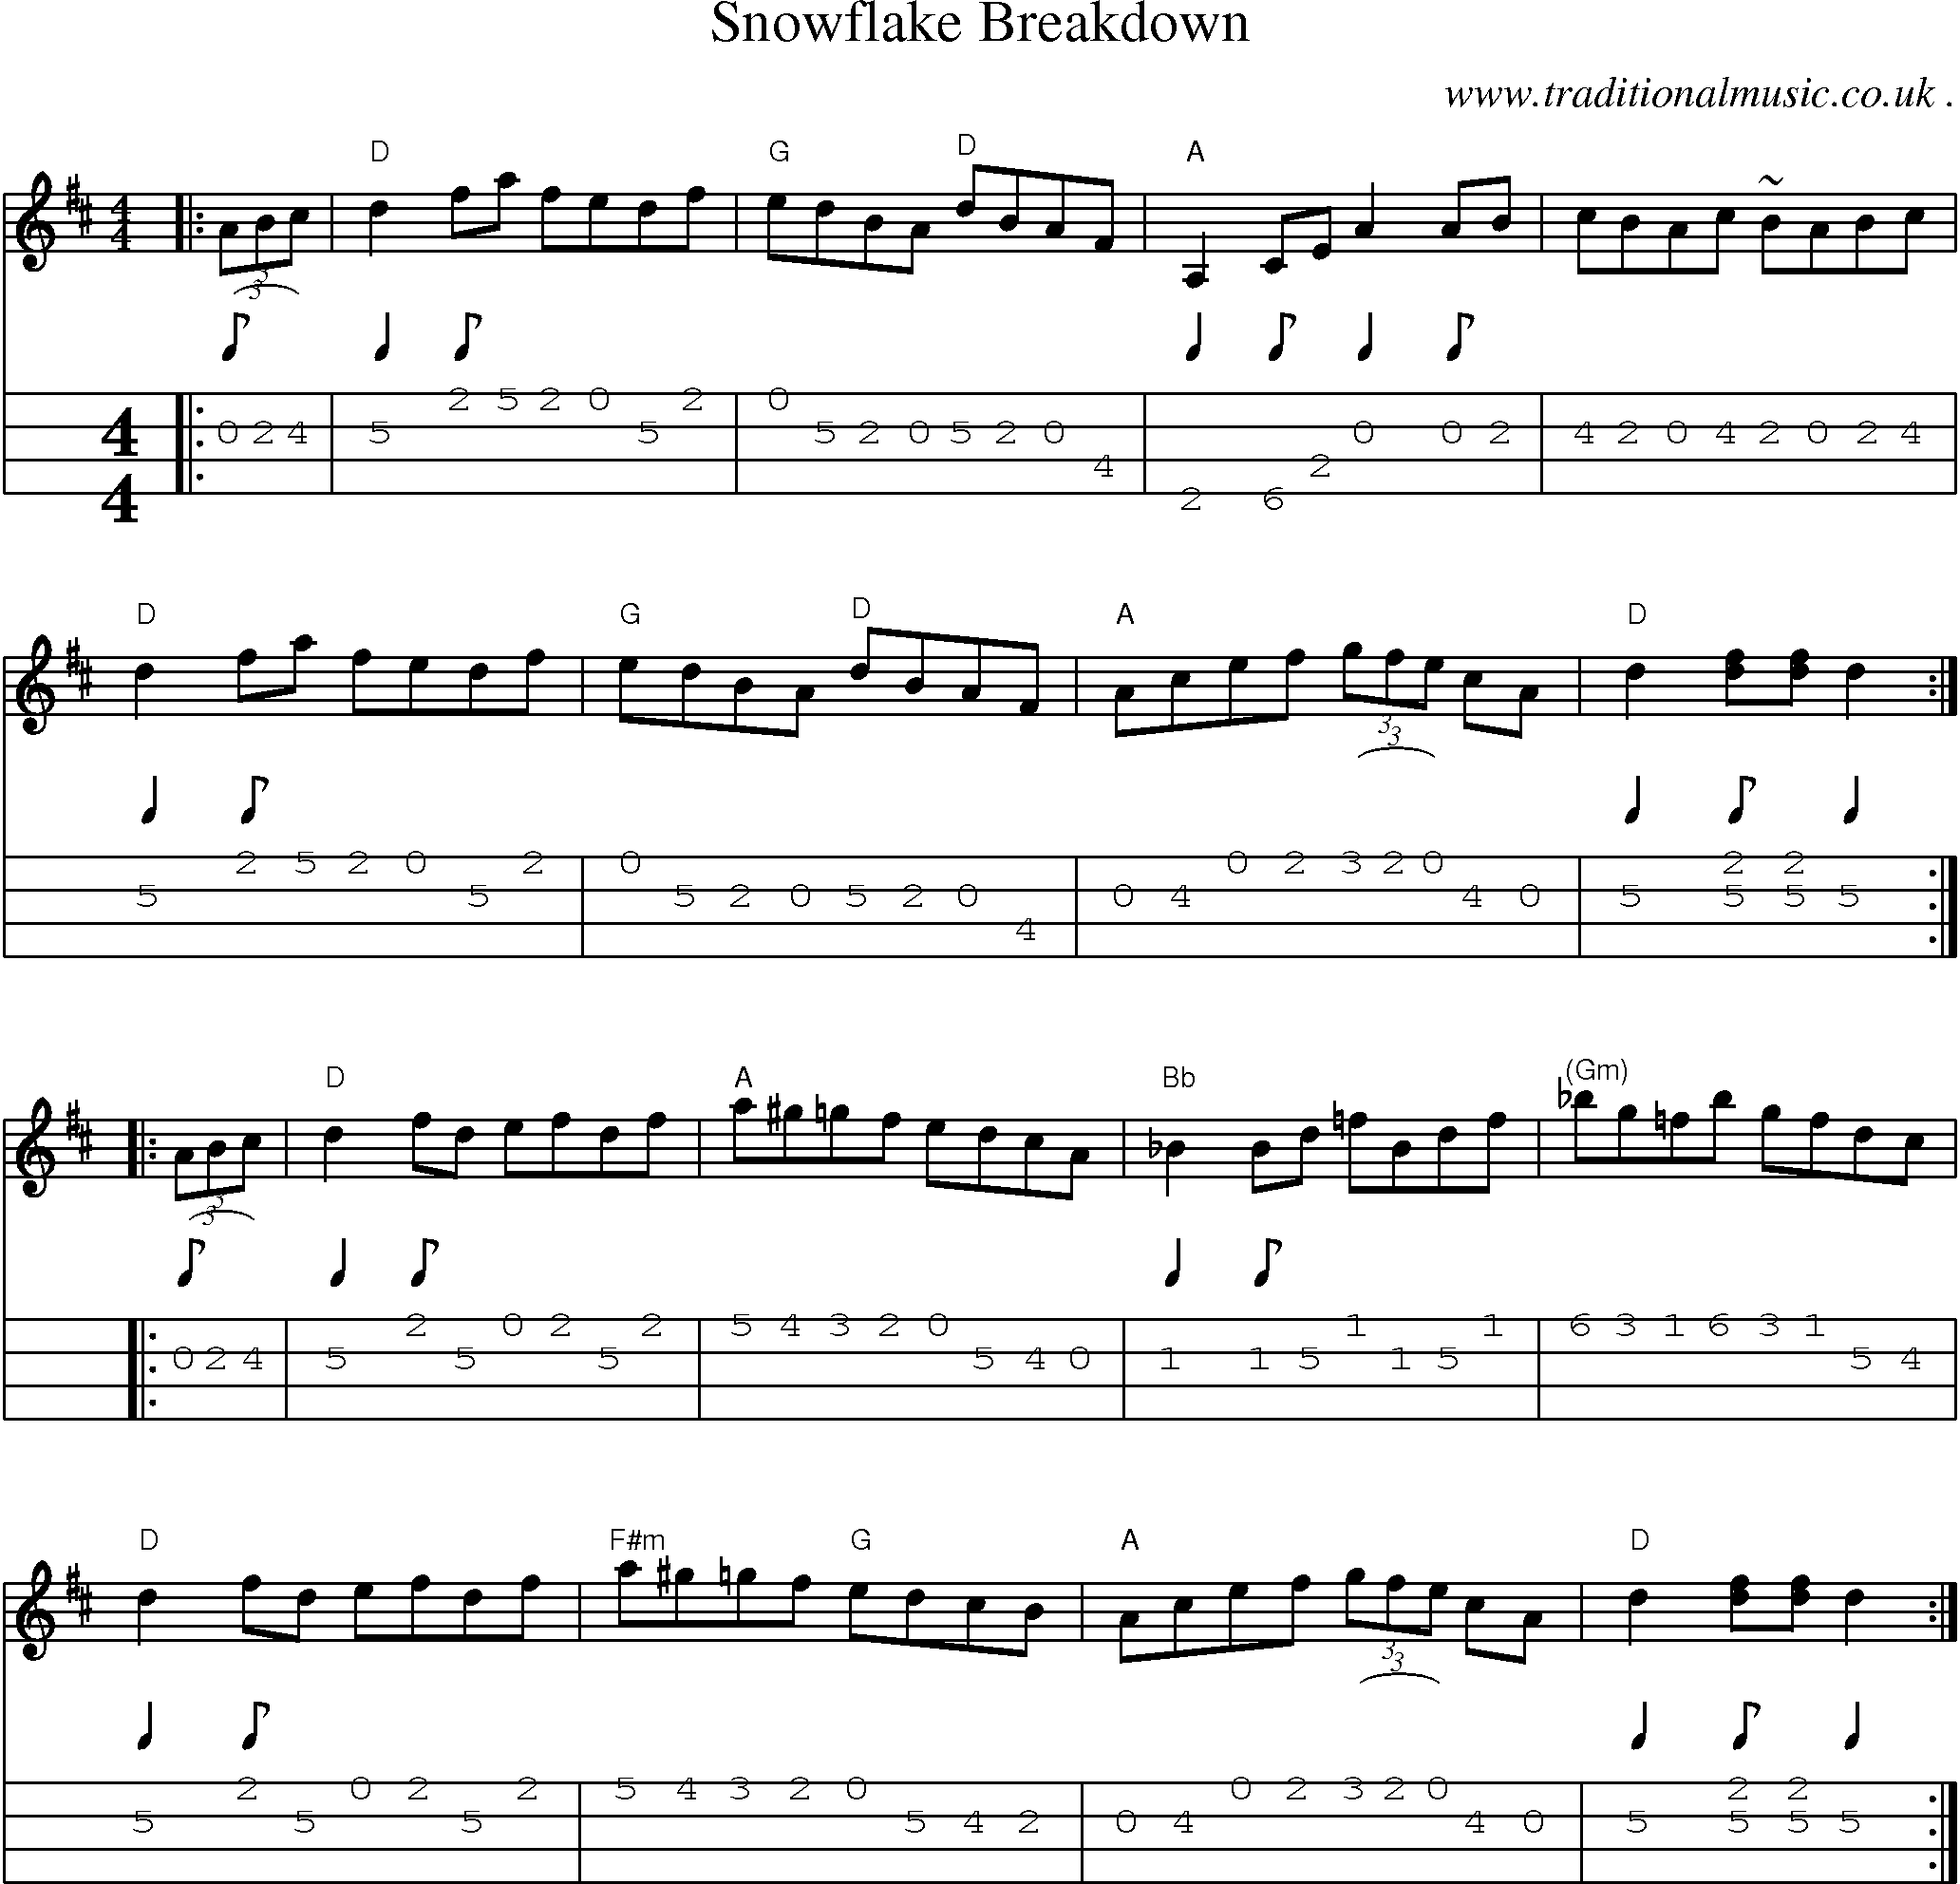 Music Score and Guitar Tabs for Snowflake Breakdown